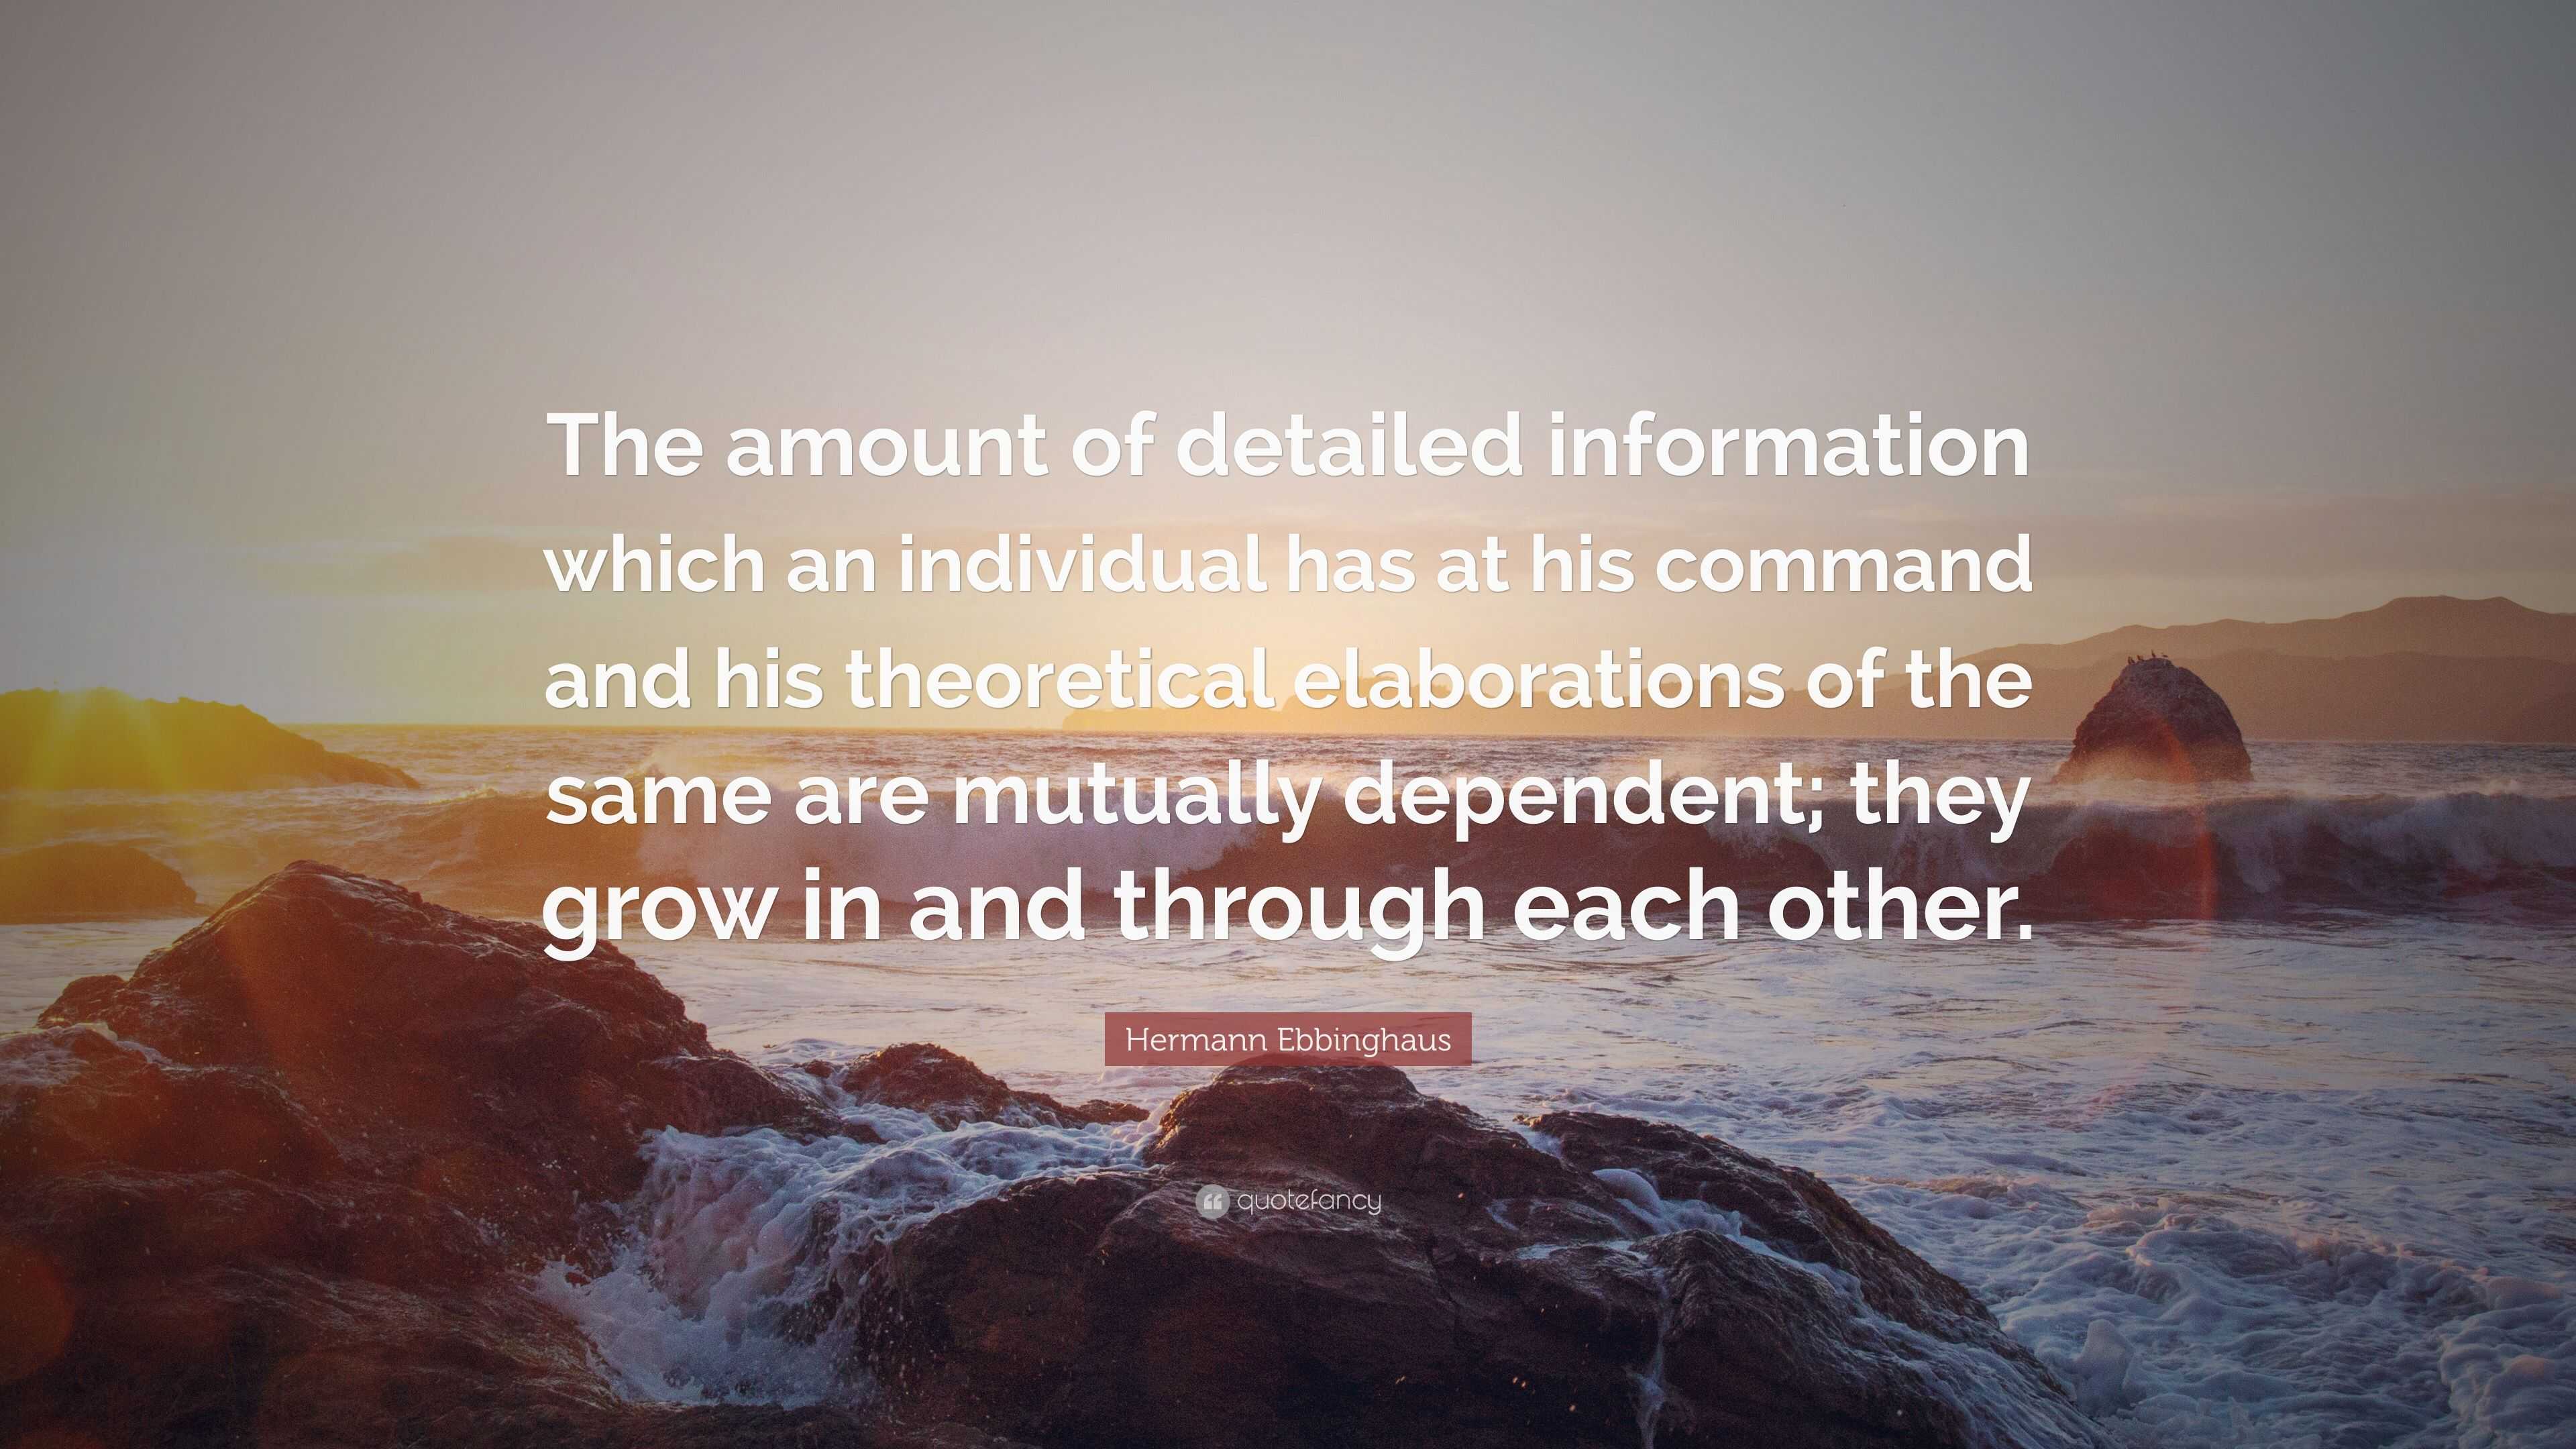 Hermann Ebbinghaus Quote: “The amount of detailed information which an ...